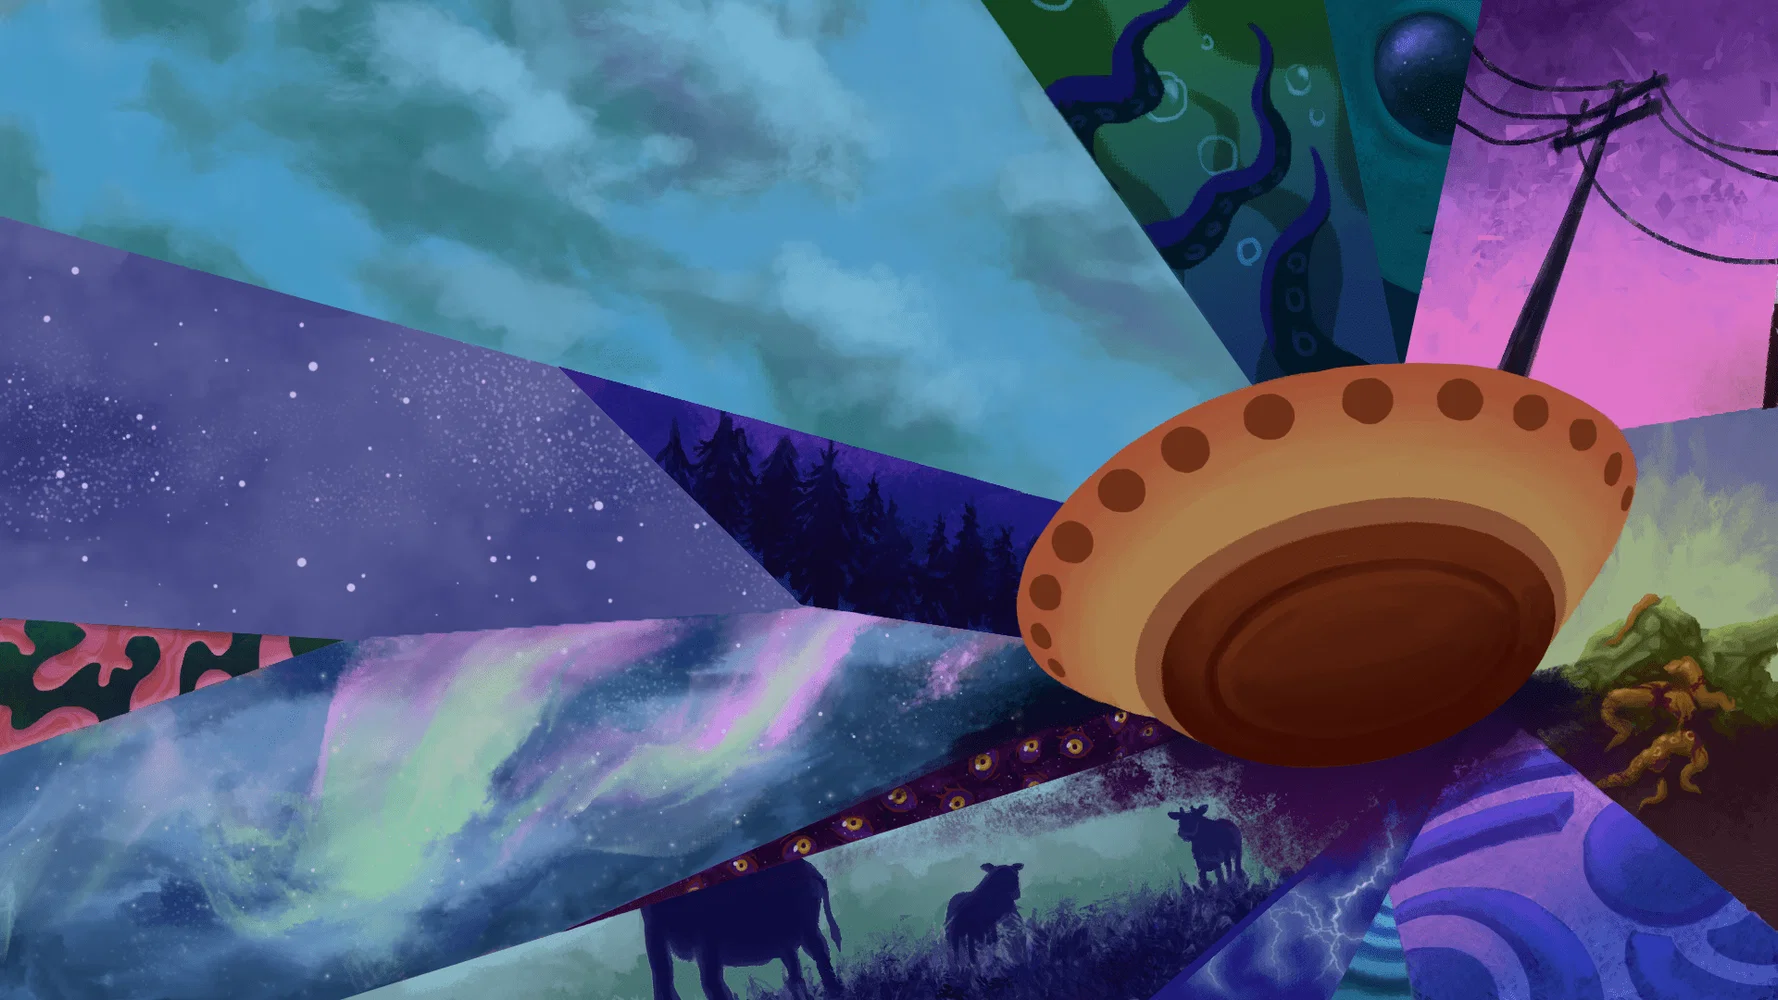 A digital illustration depicting a UFO in front of a series of fragmented images including a crop circle, a field of cows, tentacles, and the sky.